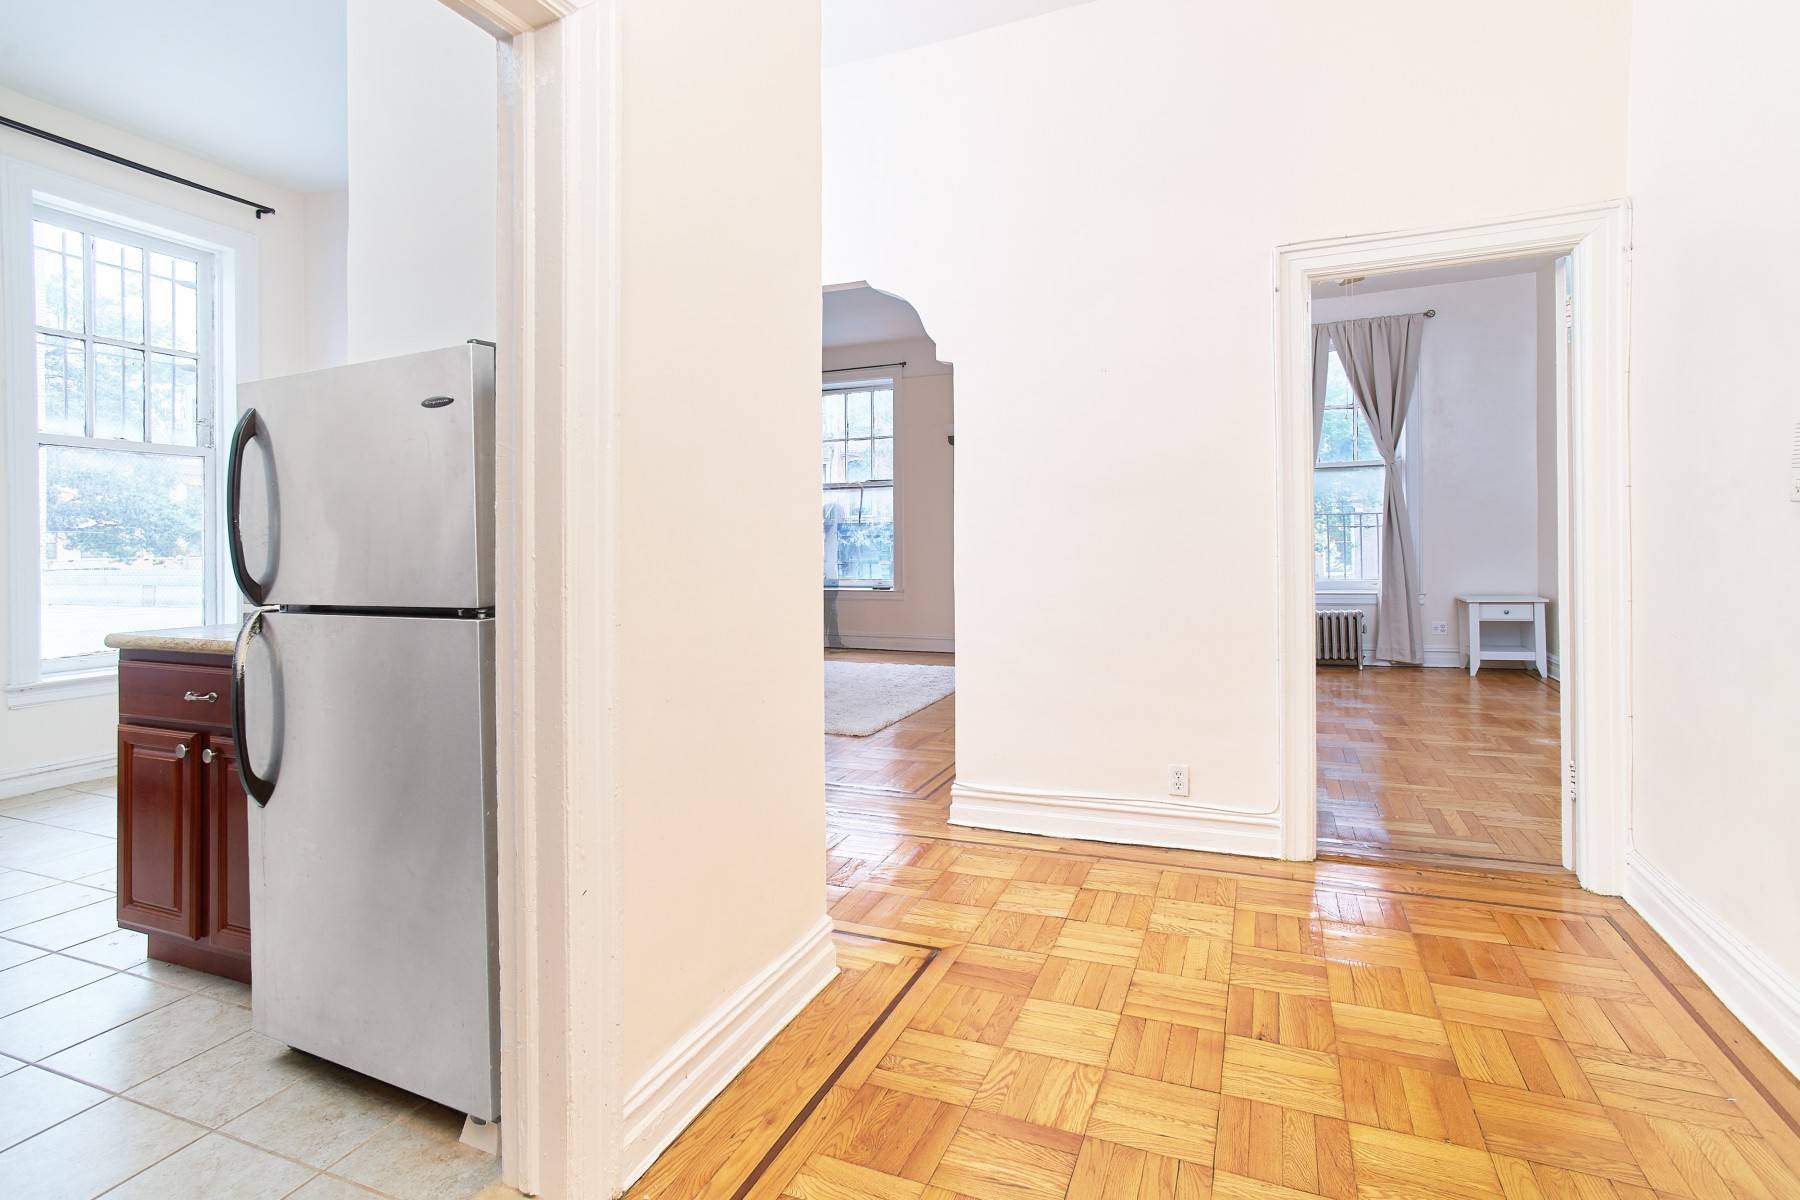 Welcome home ! This is a beautiful over sized 1 bedroom with a eat in kitchen located in one of the most charming neighborhoods in BK !